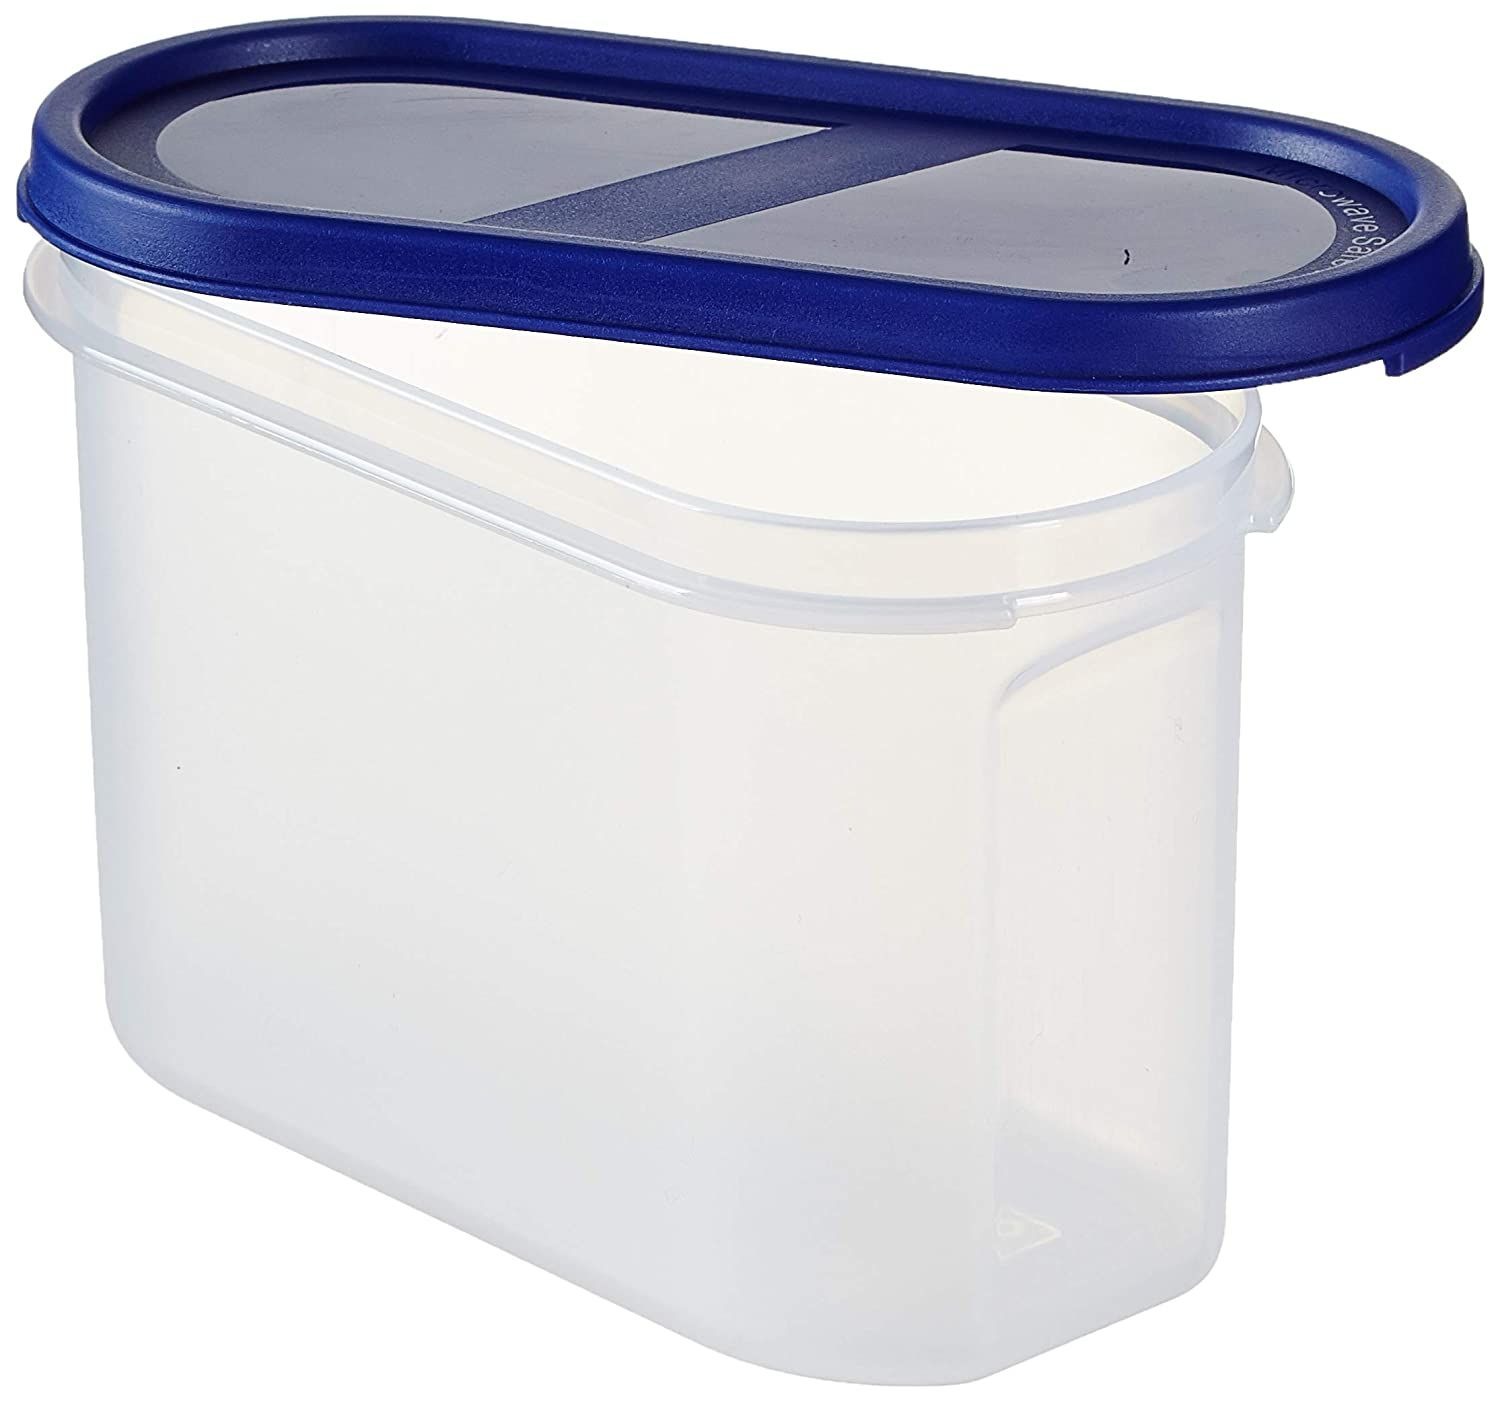 MODGET Plastic Storage Container Set with Flexi Lid (3 pieces, 1200ml) White  (1200ml Air Tight Cont